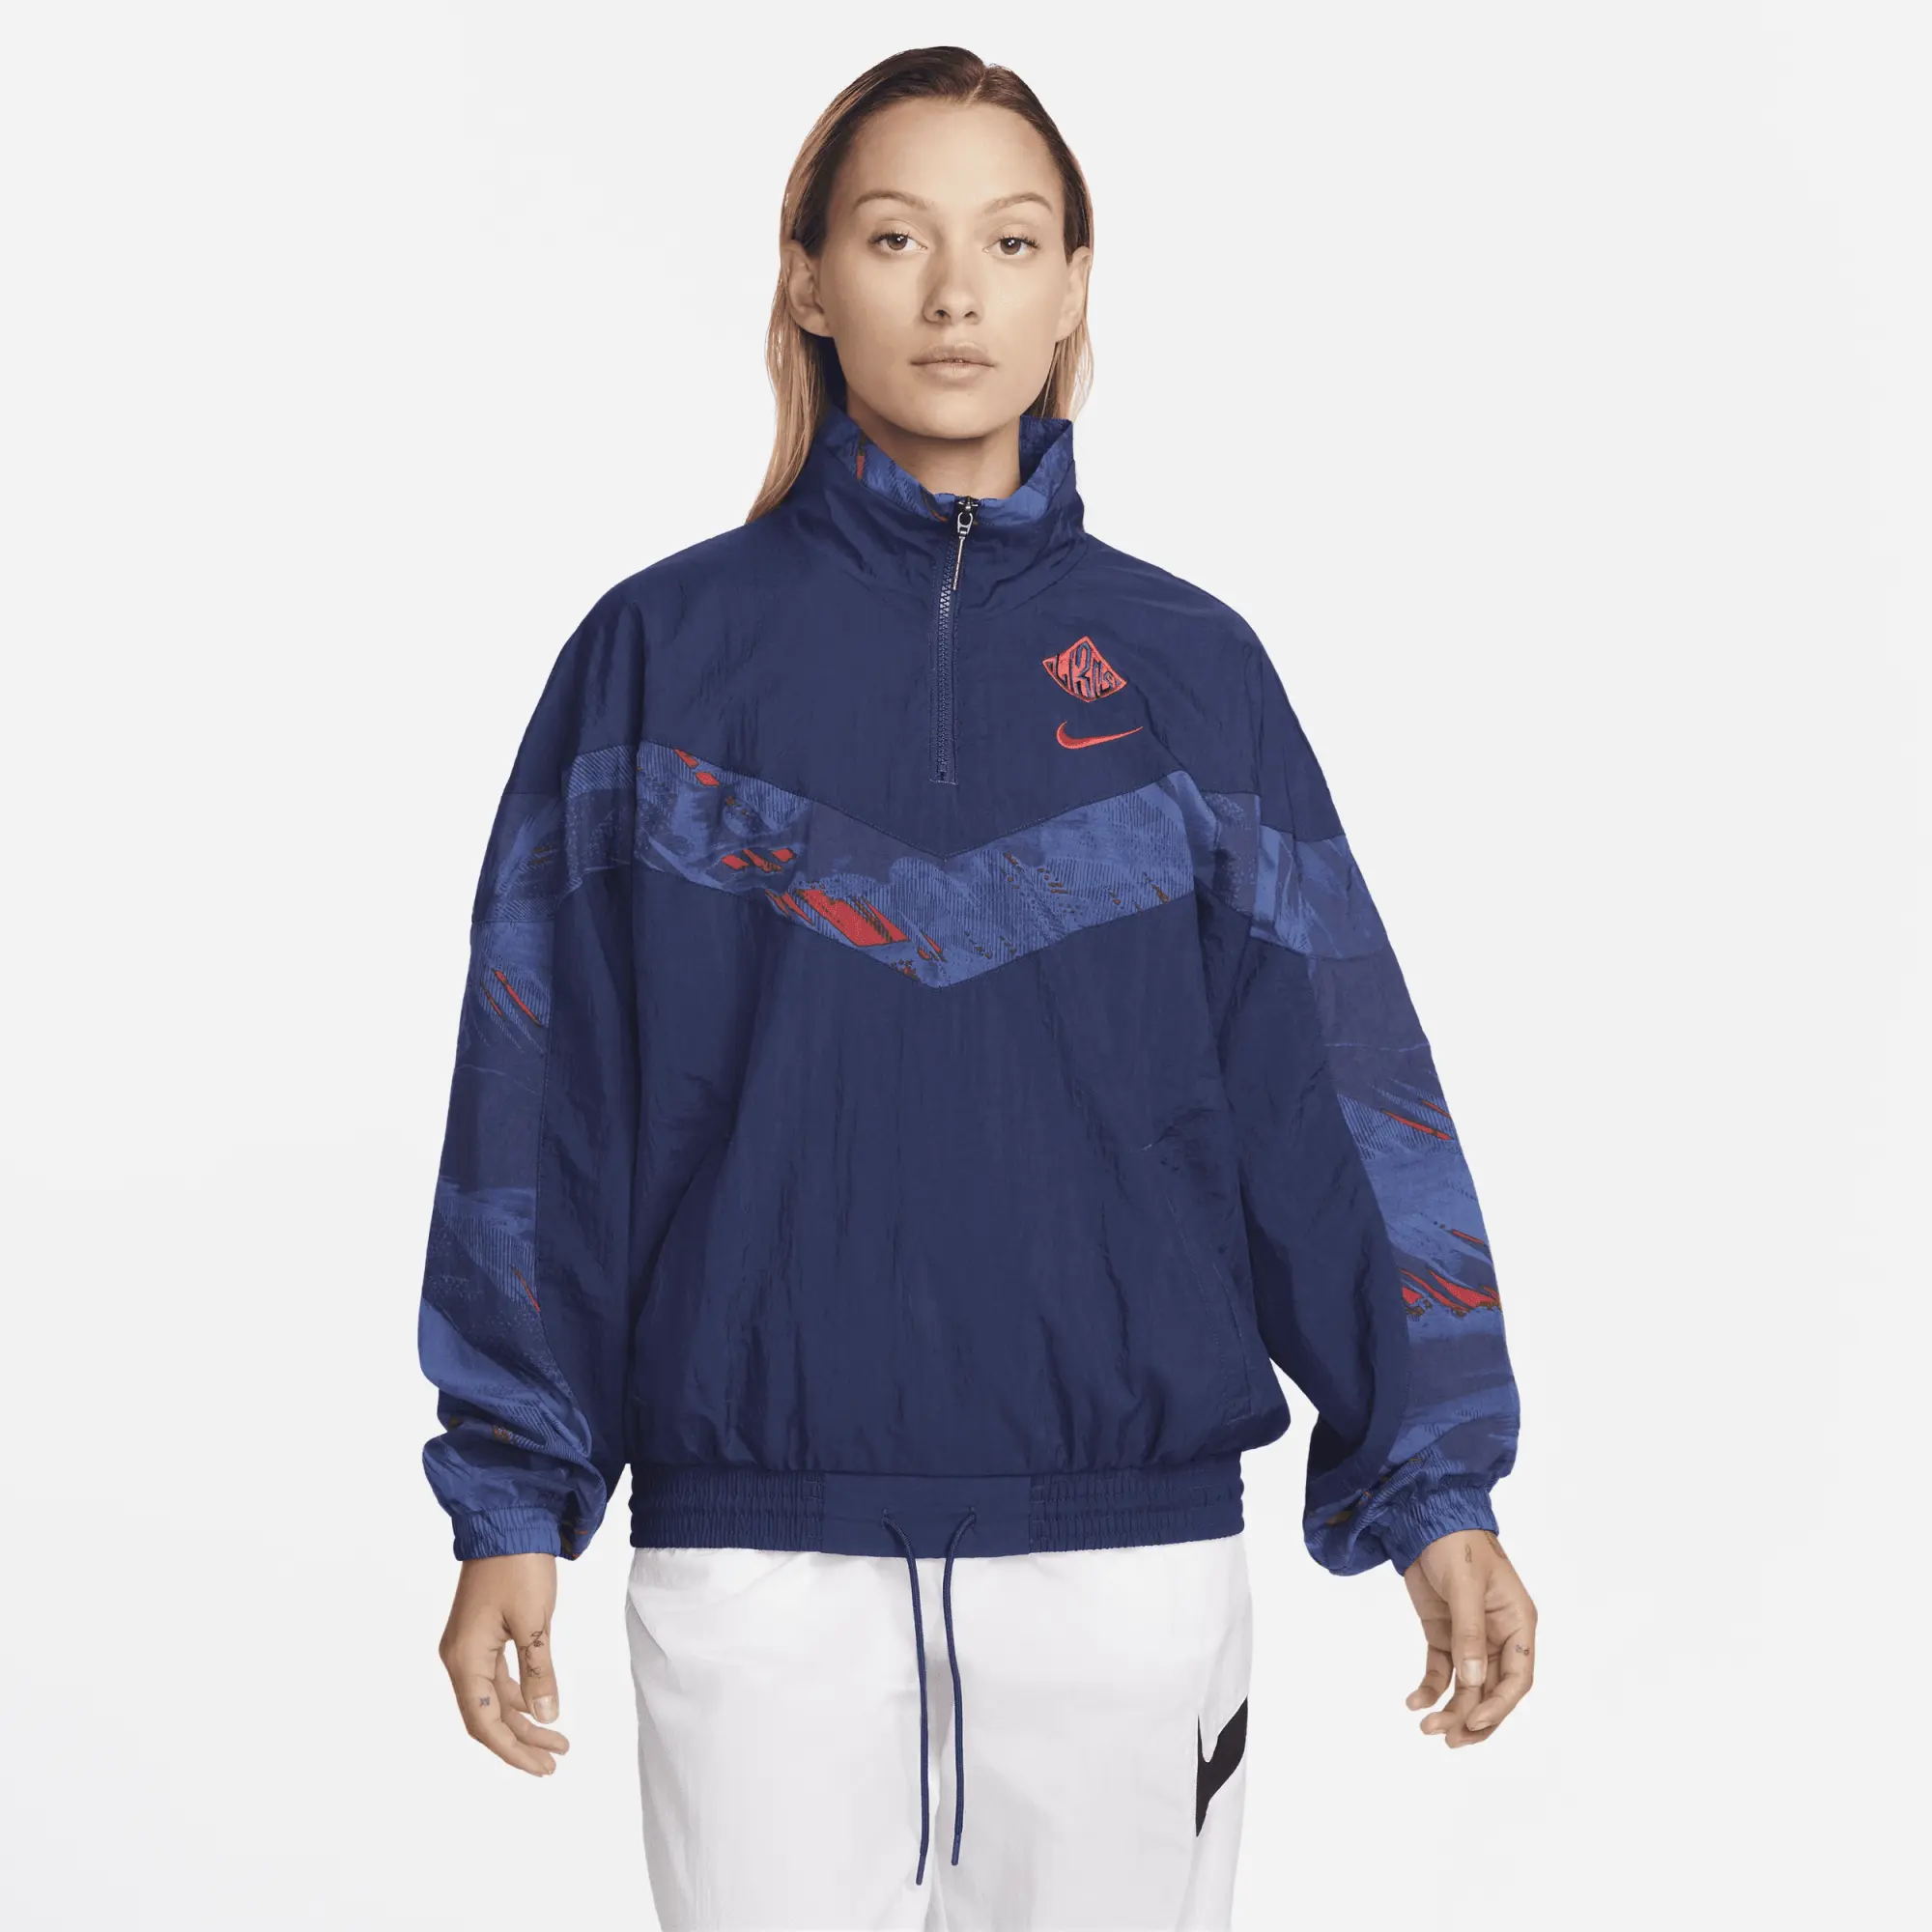 Nike Football World Cup 2022 England Unisex Woven Jacket In Navy